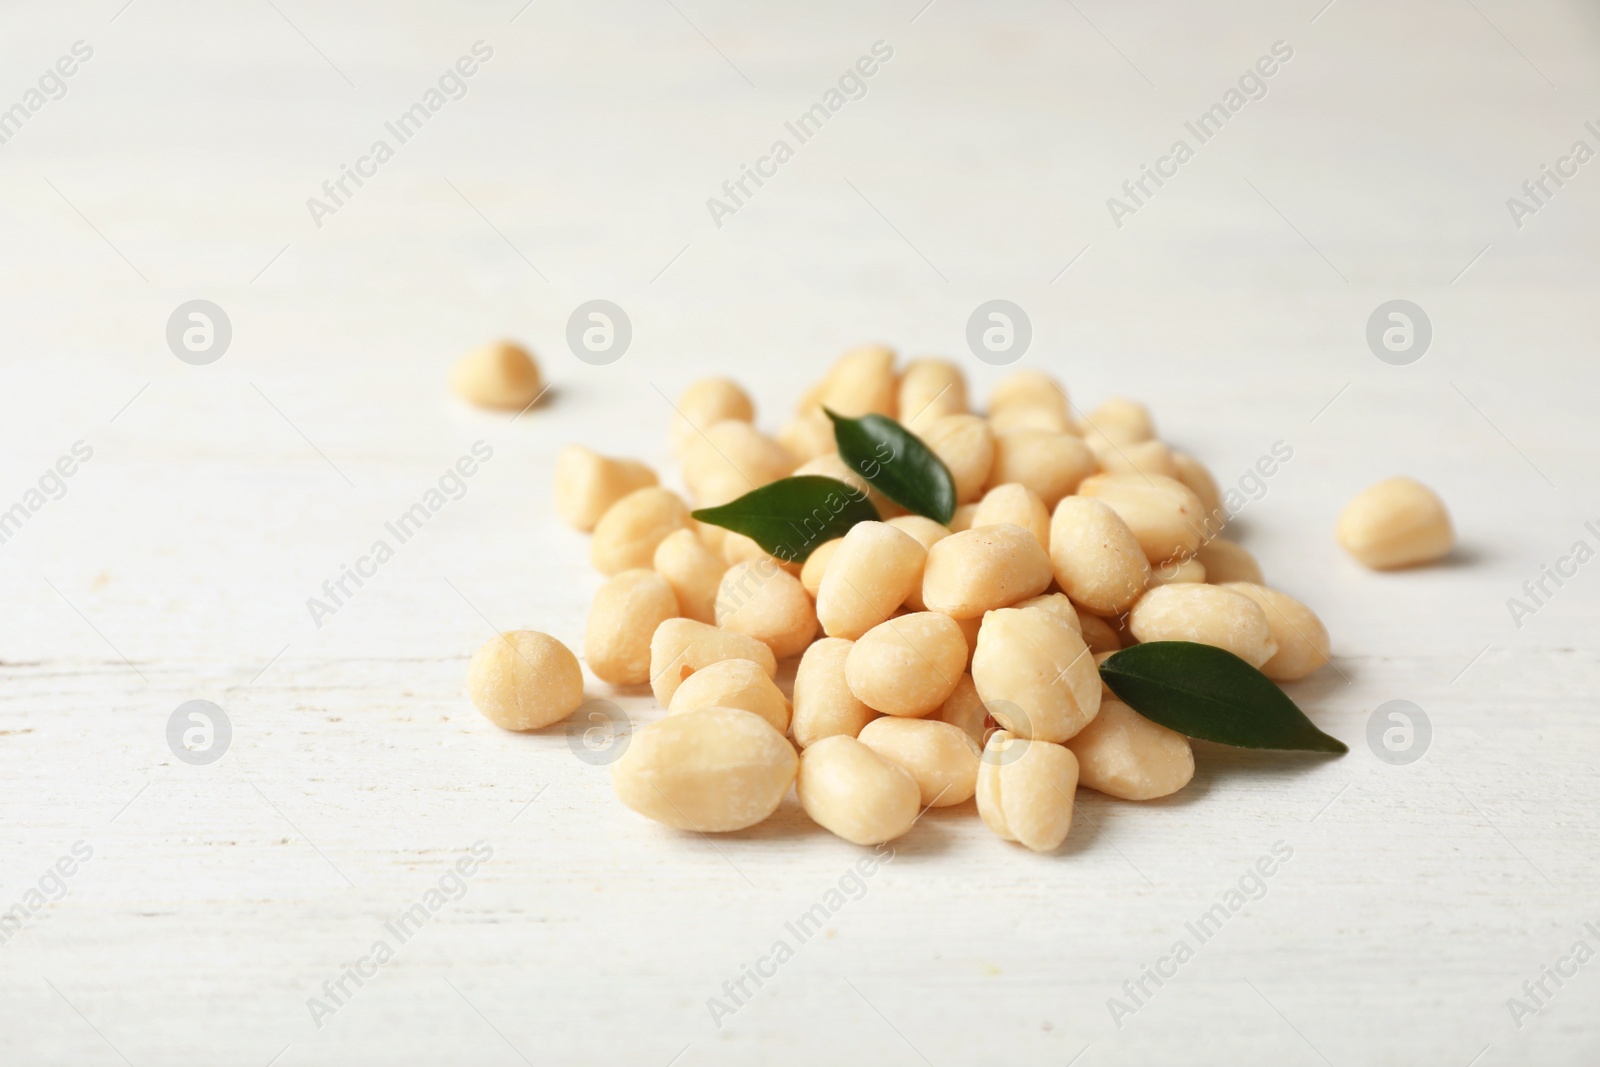 Photo of Pile of shelled peanuts and leaves on table